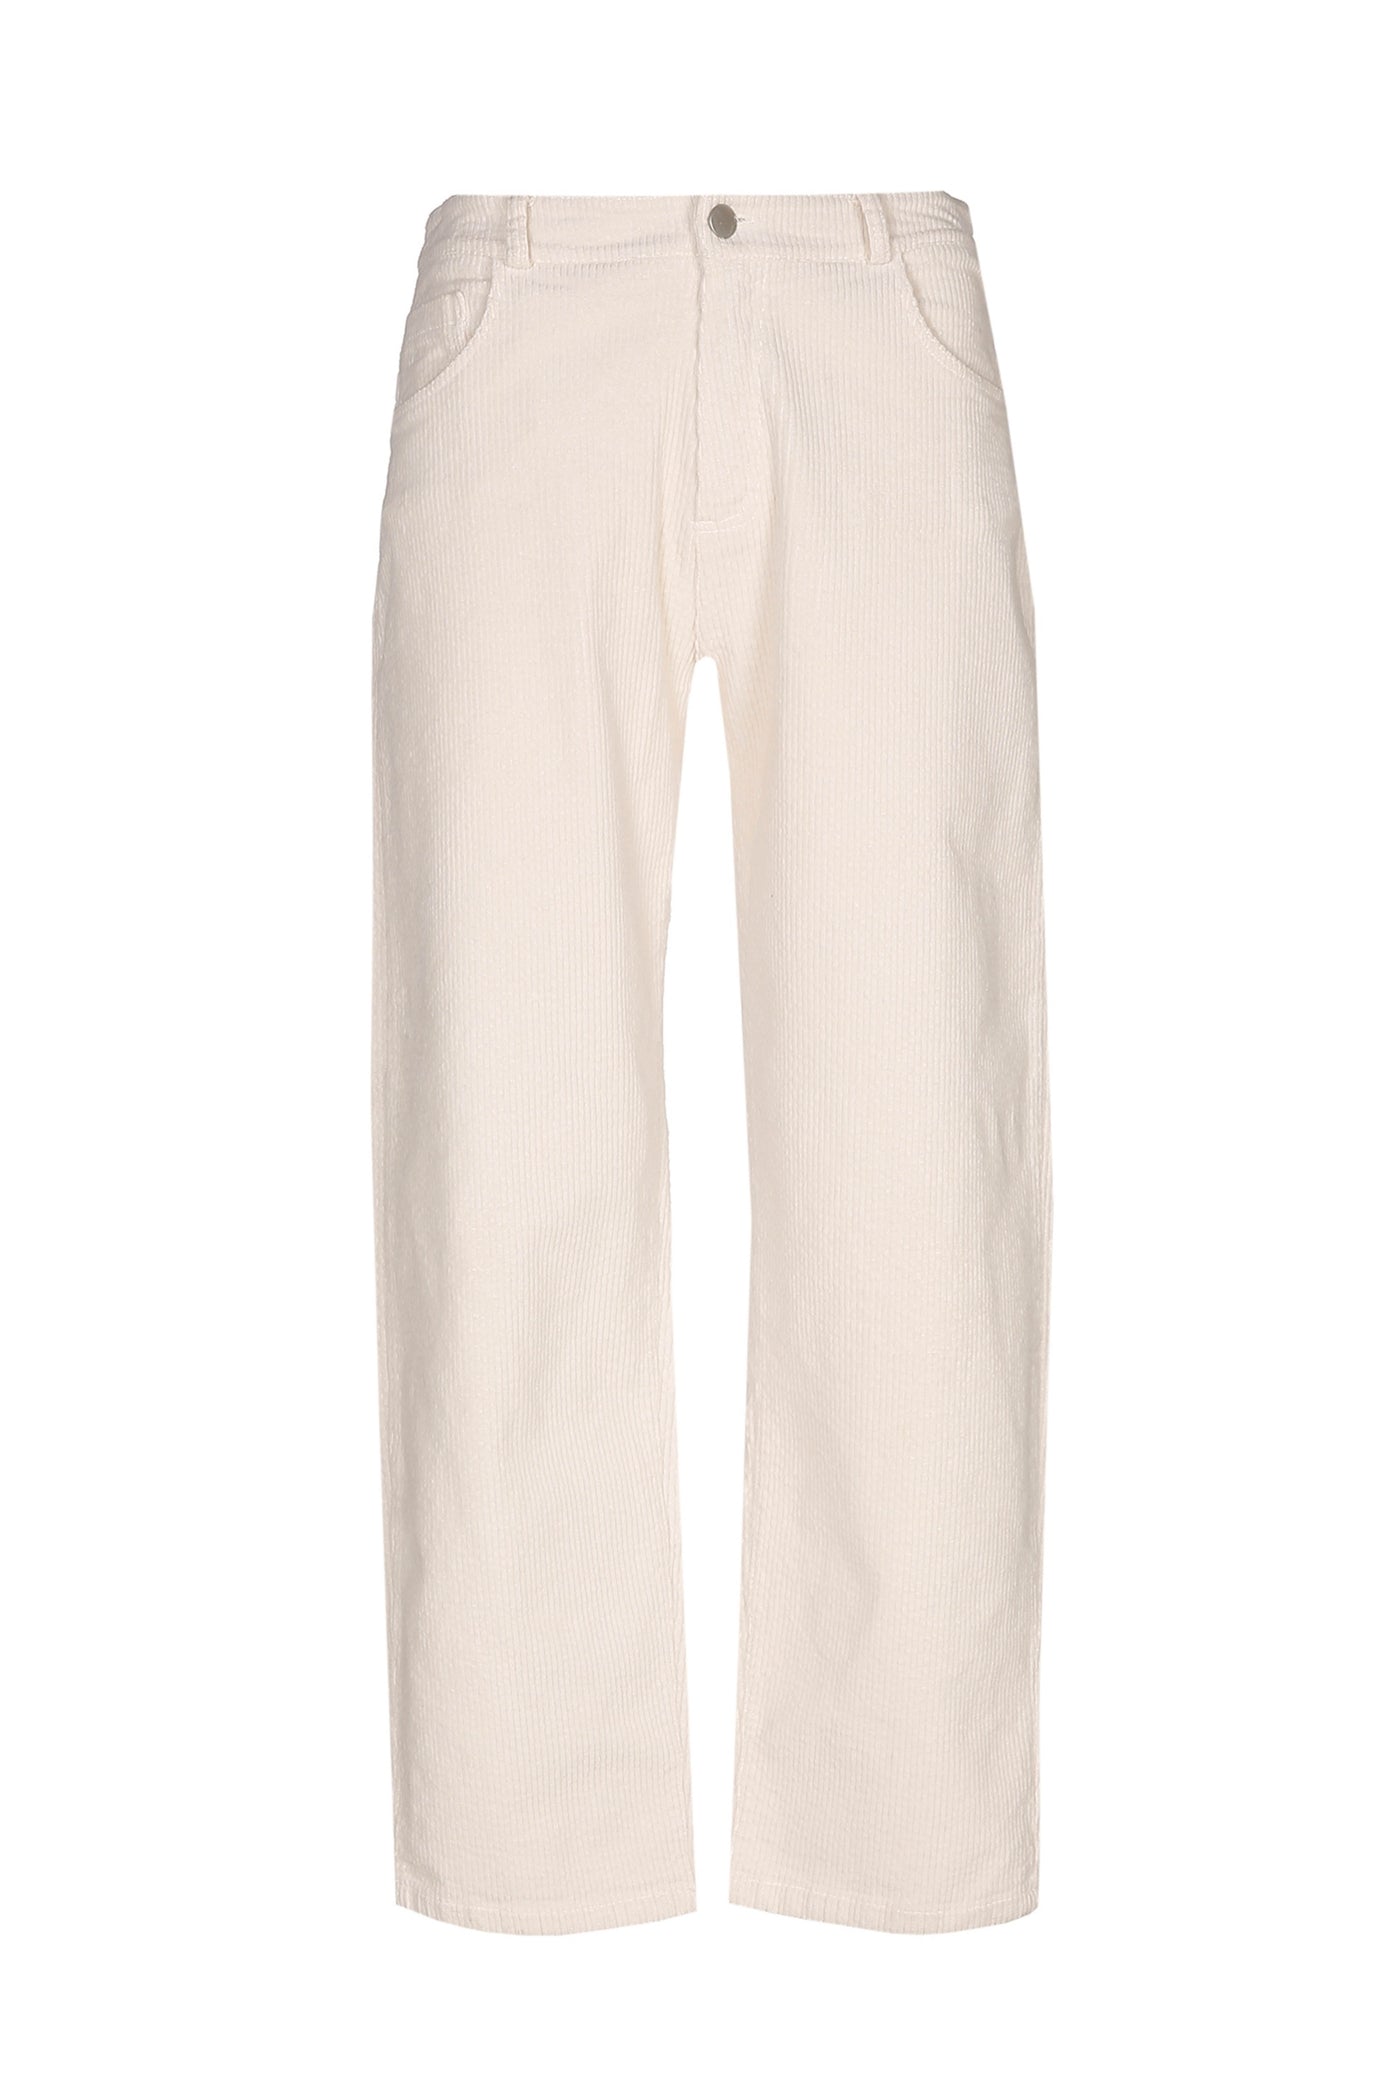 Jolly Trousers Off White